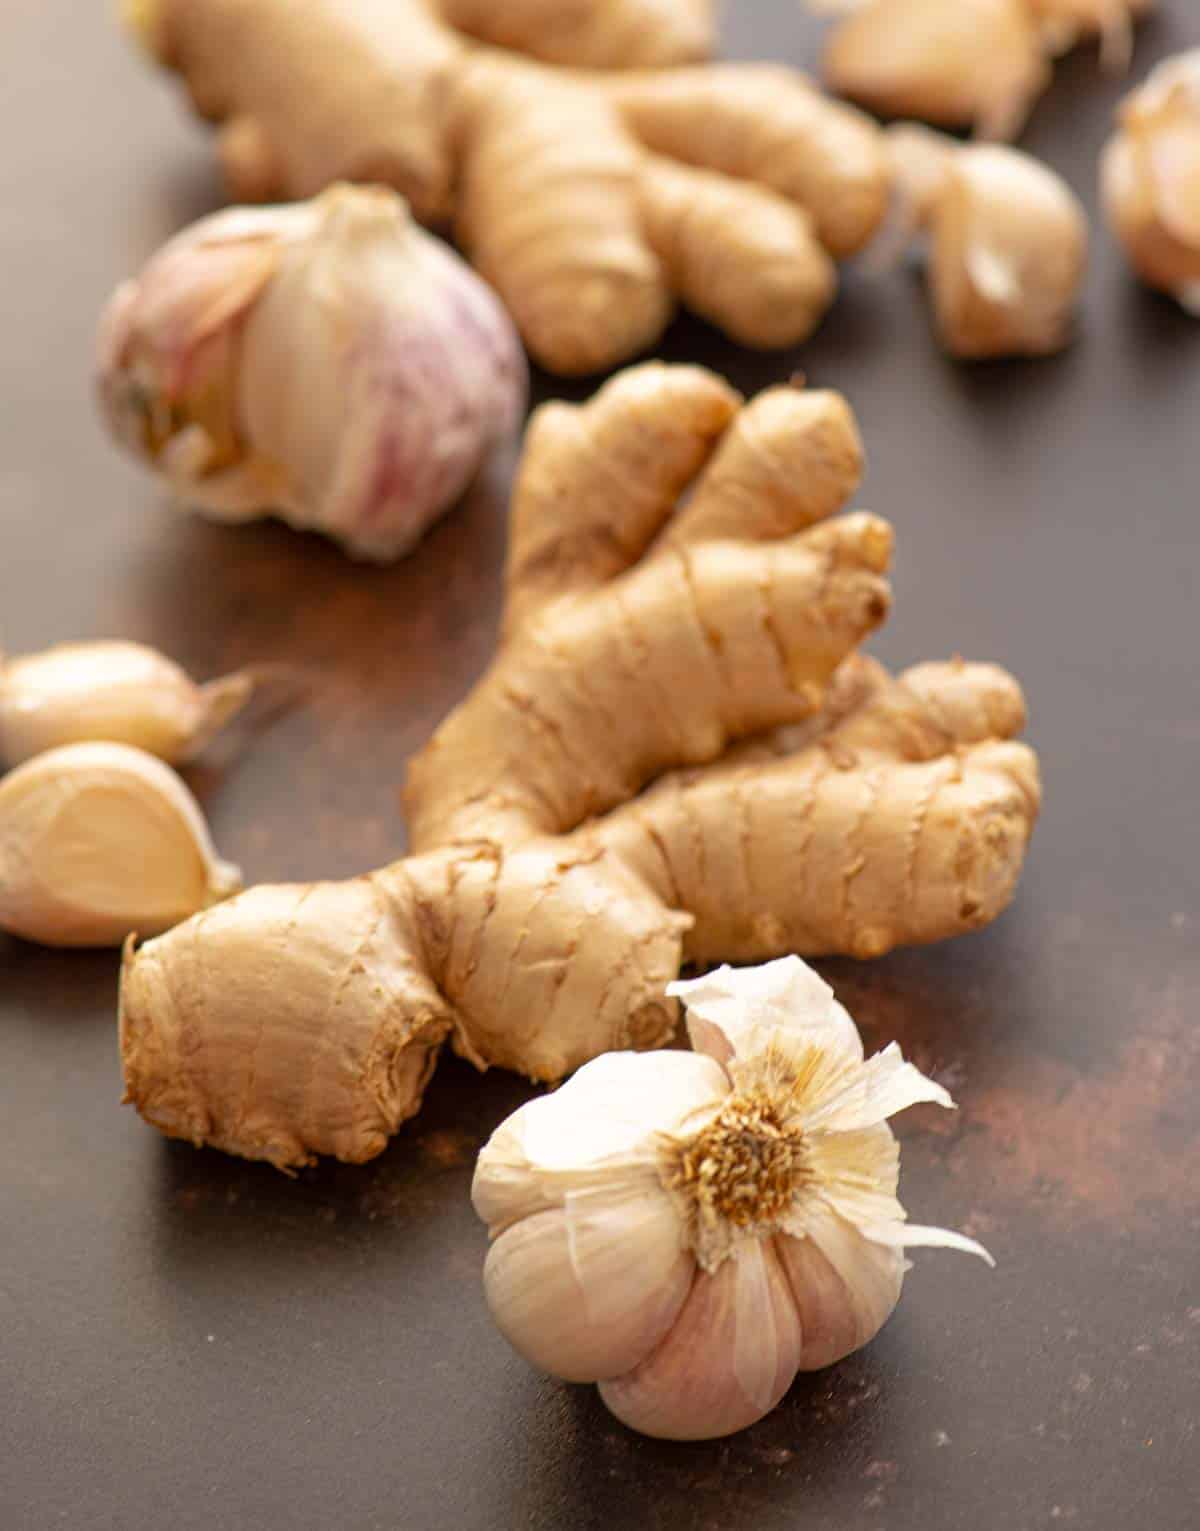 ginger and garlic on a brown surface